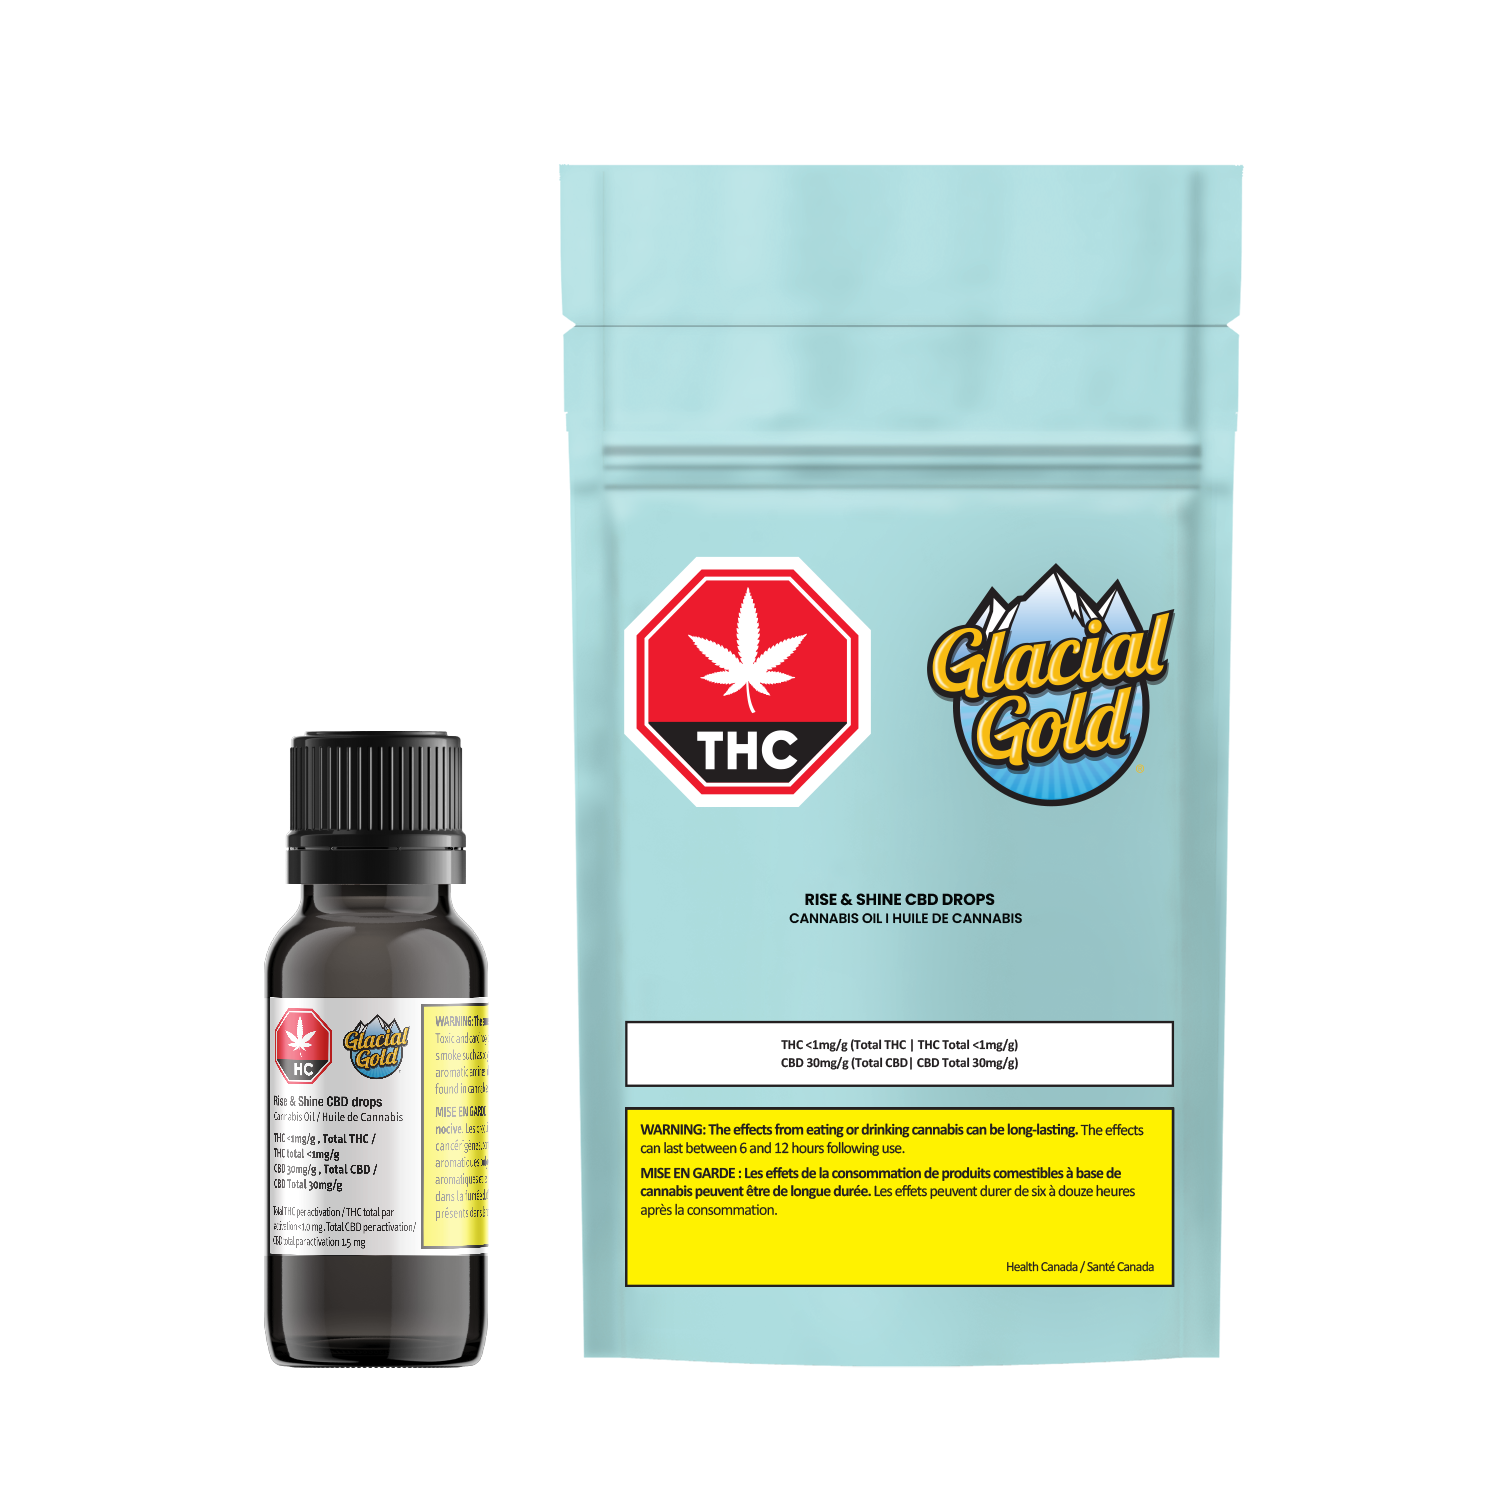 Cannabis Product Glacial Gold - Rise & Shine CBD Drops by Glacial Gold - 1